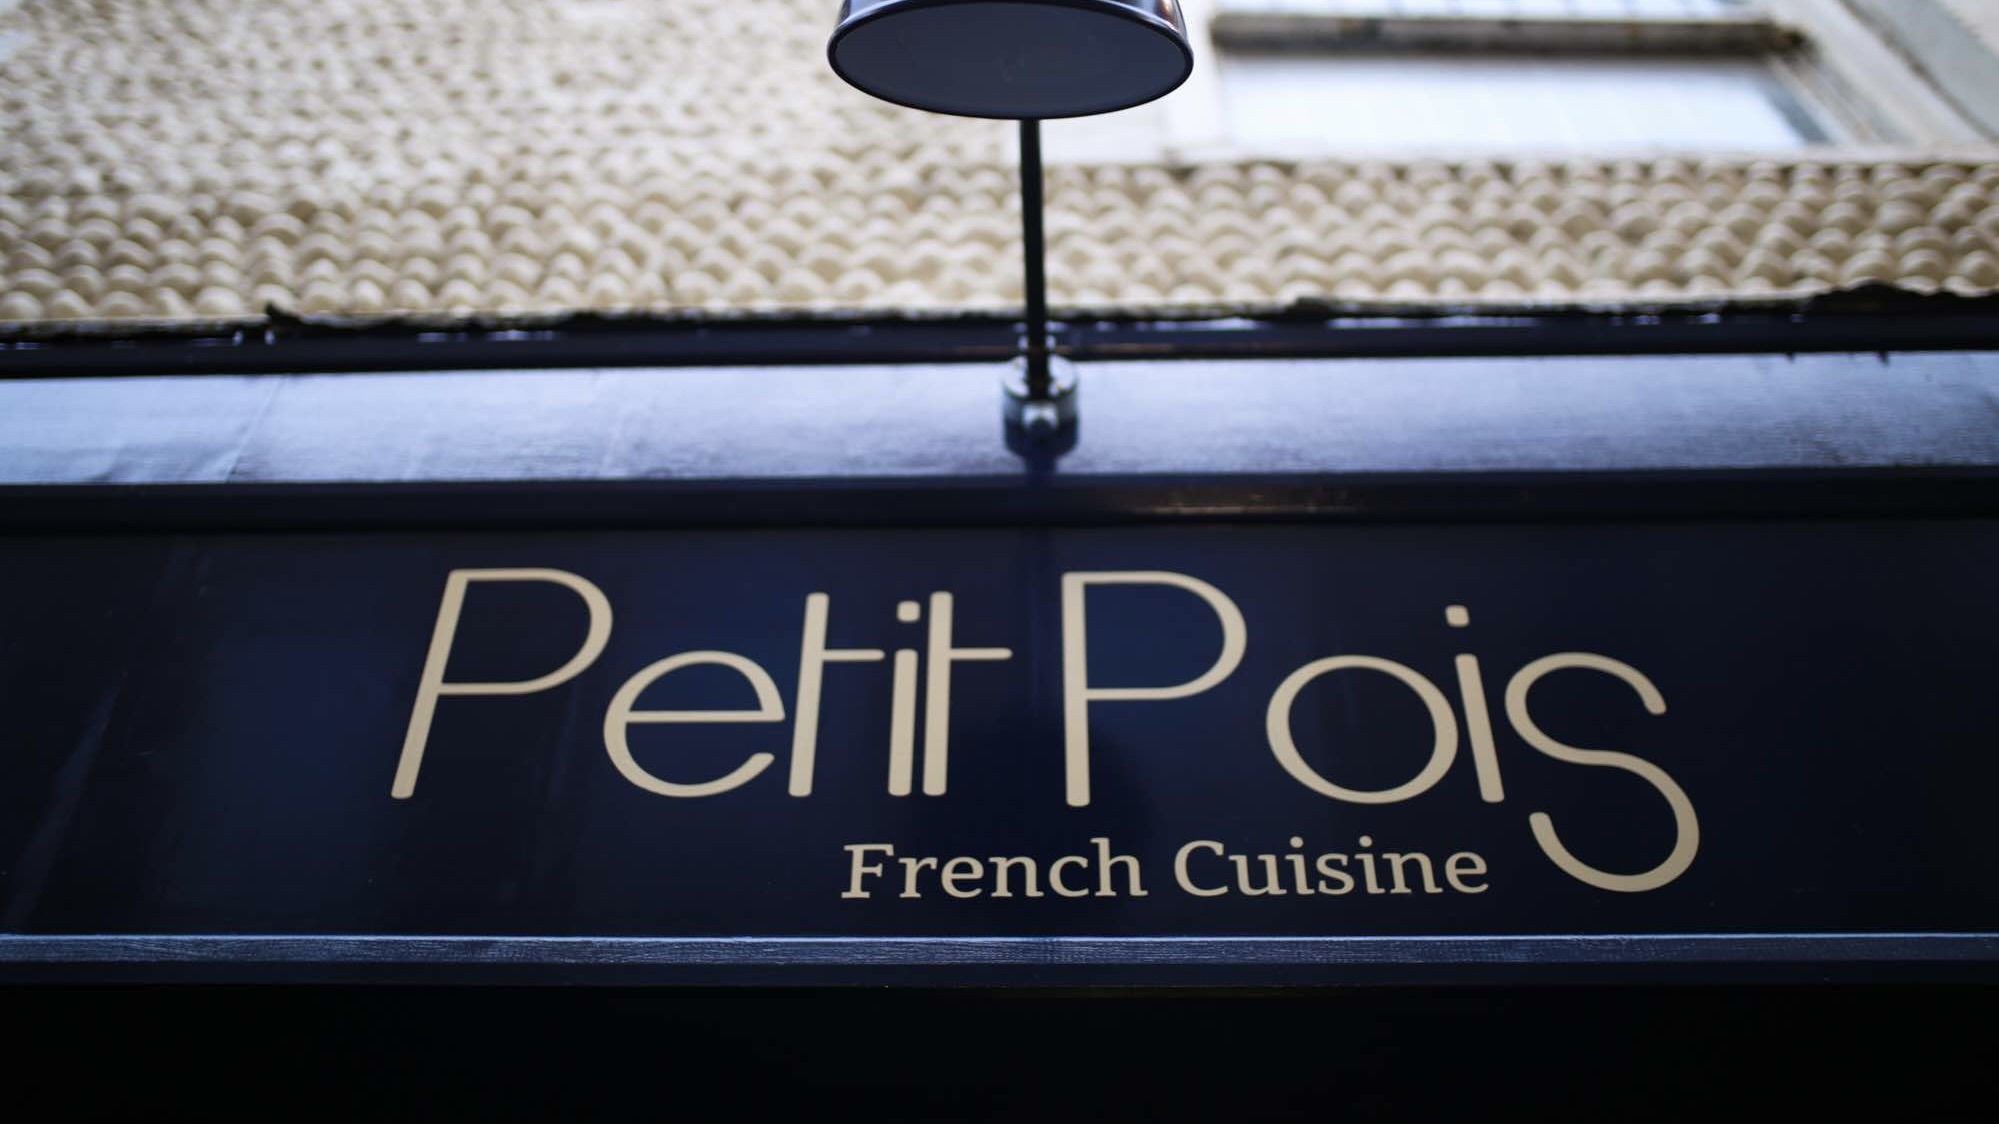 Petits-Pois is one of the top Brighton restaurants with exterior sign